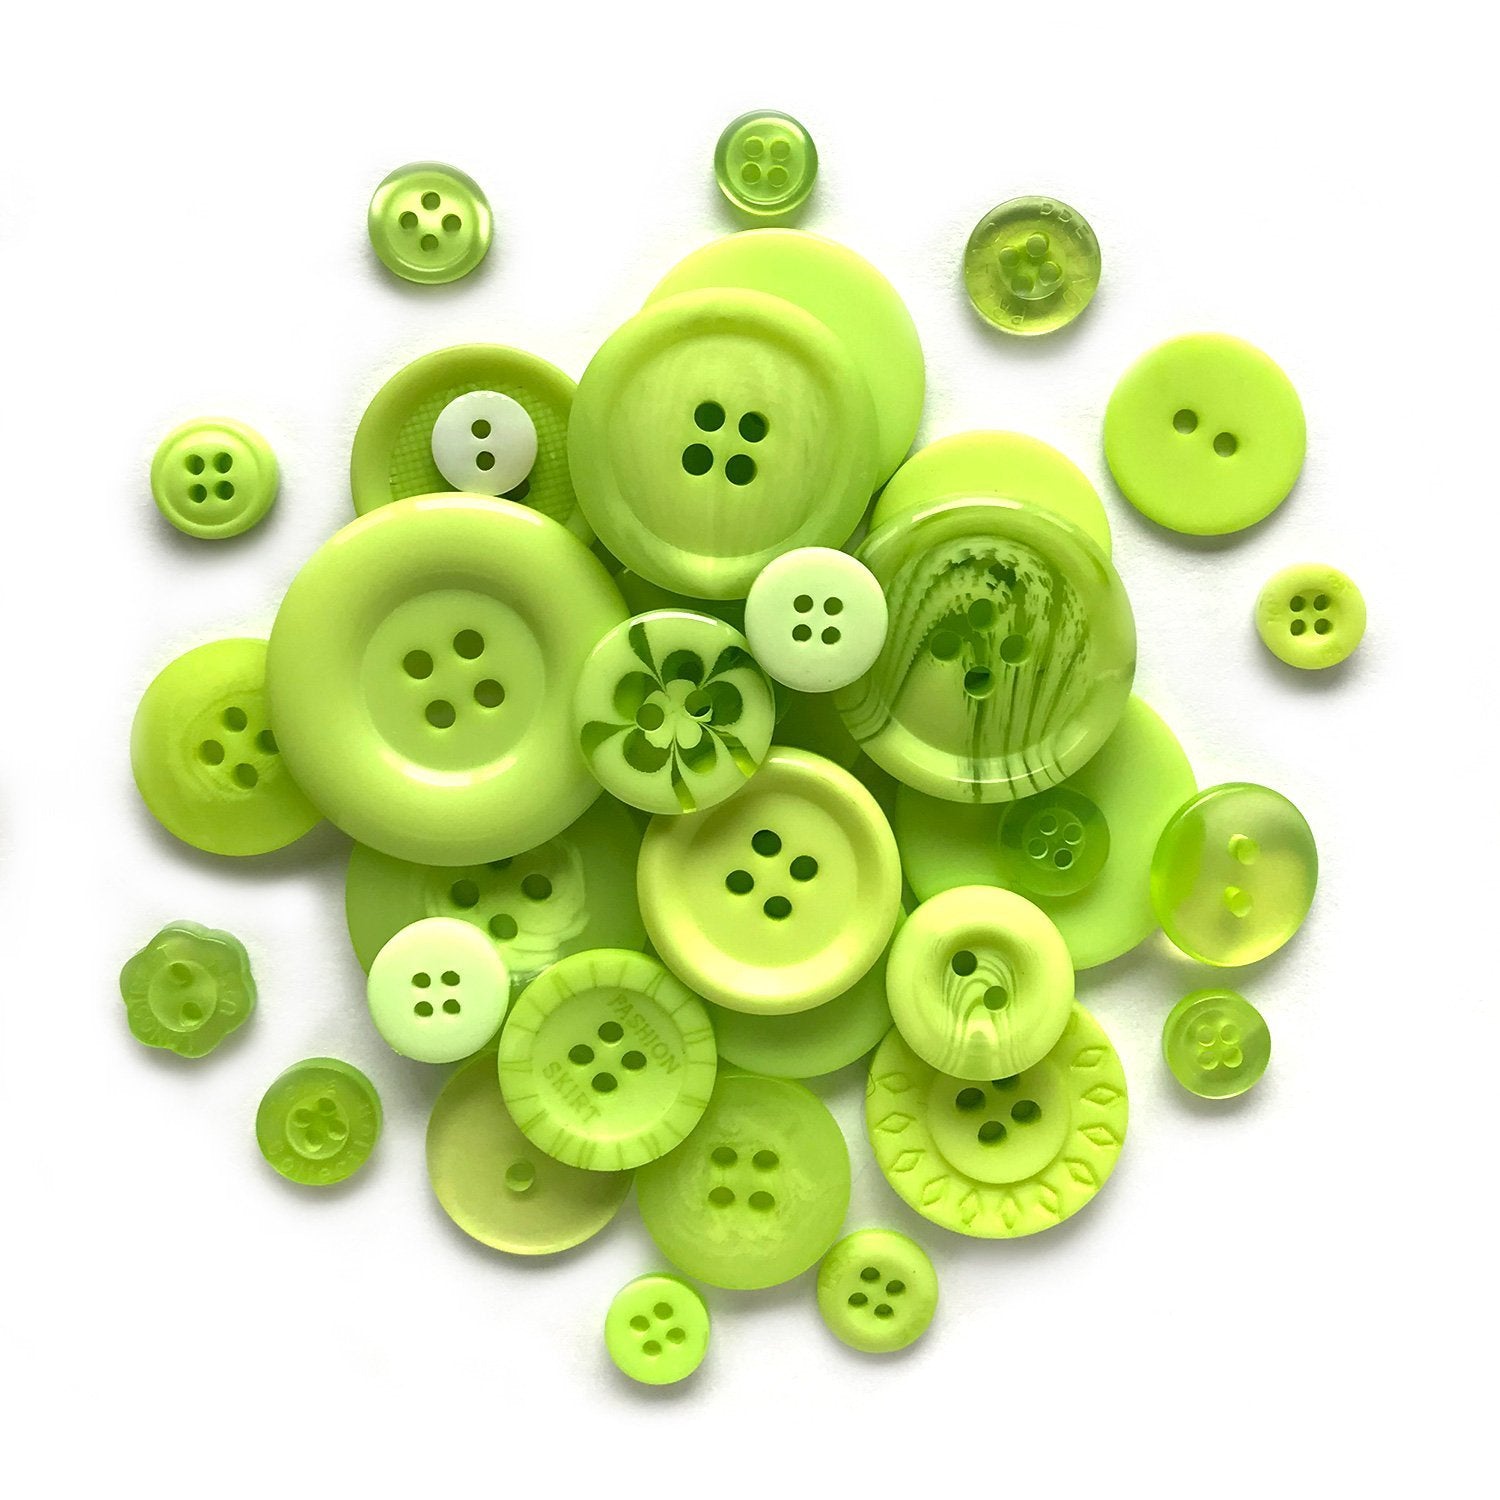  Greentime 2500pcs Assorted Buttons for Crafts Bulk